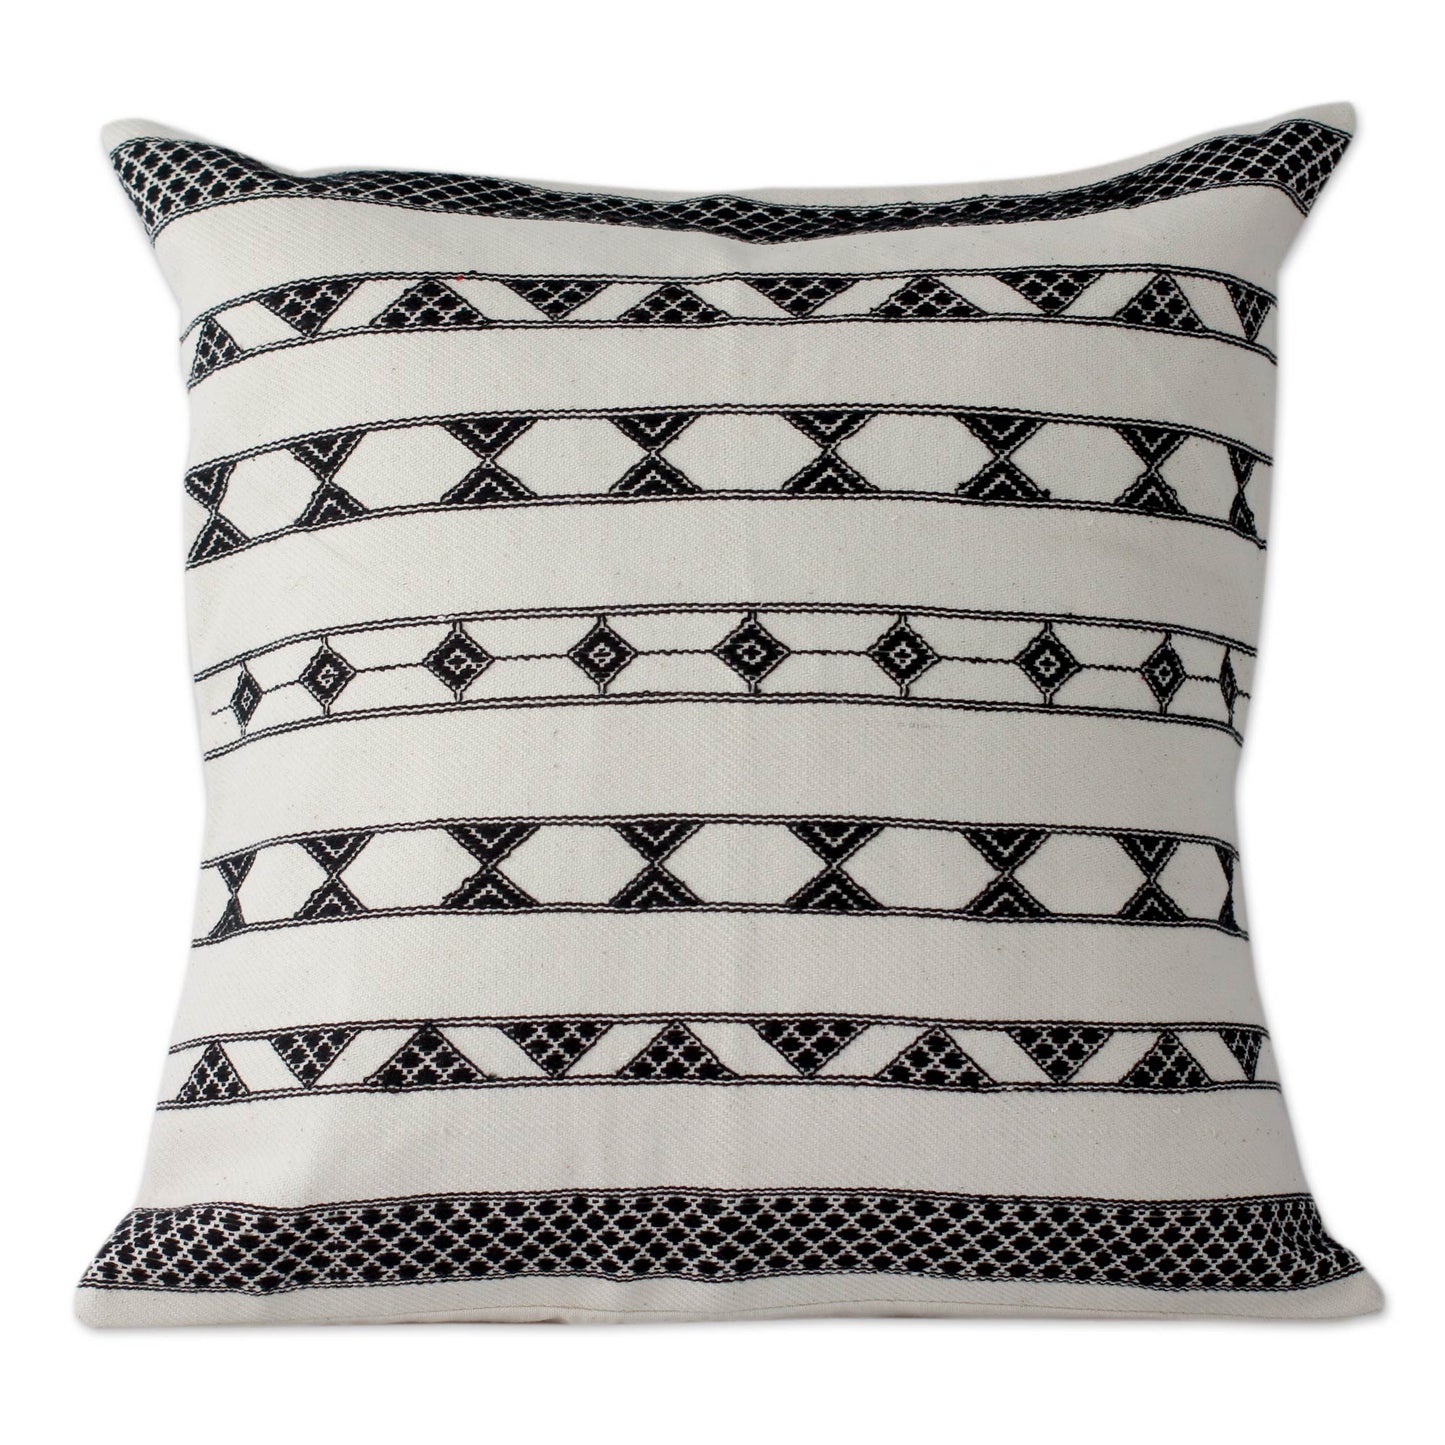 Desert Geometry Hand Crafted Cotton Patterned Cushion Cover (Pair)